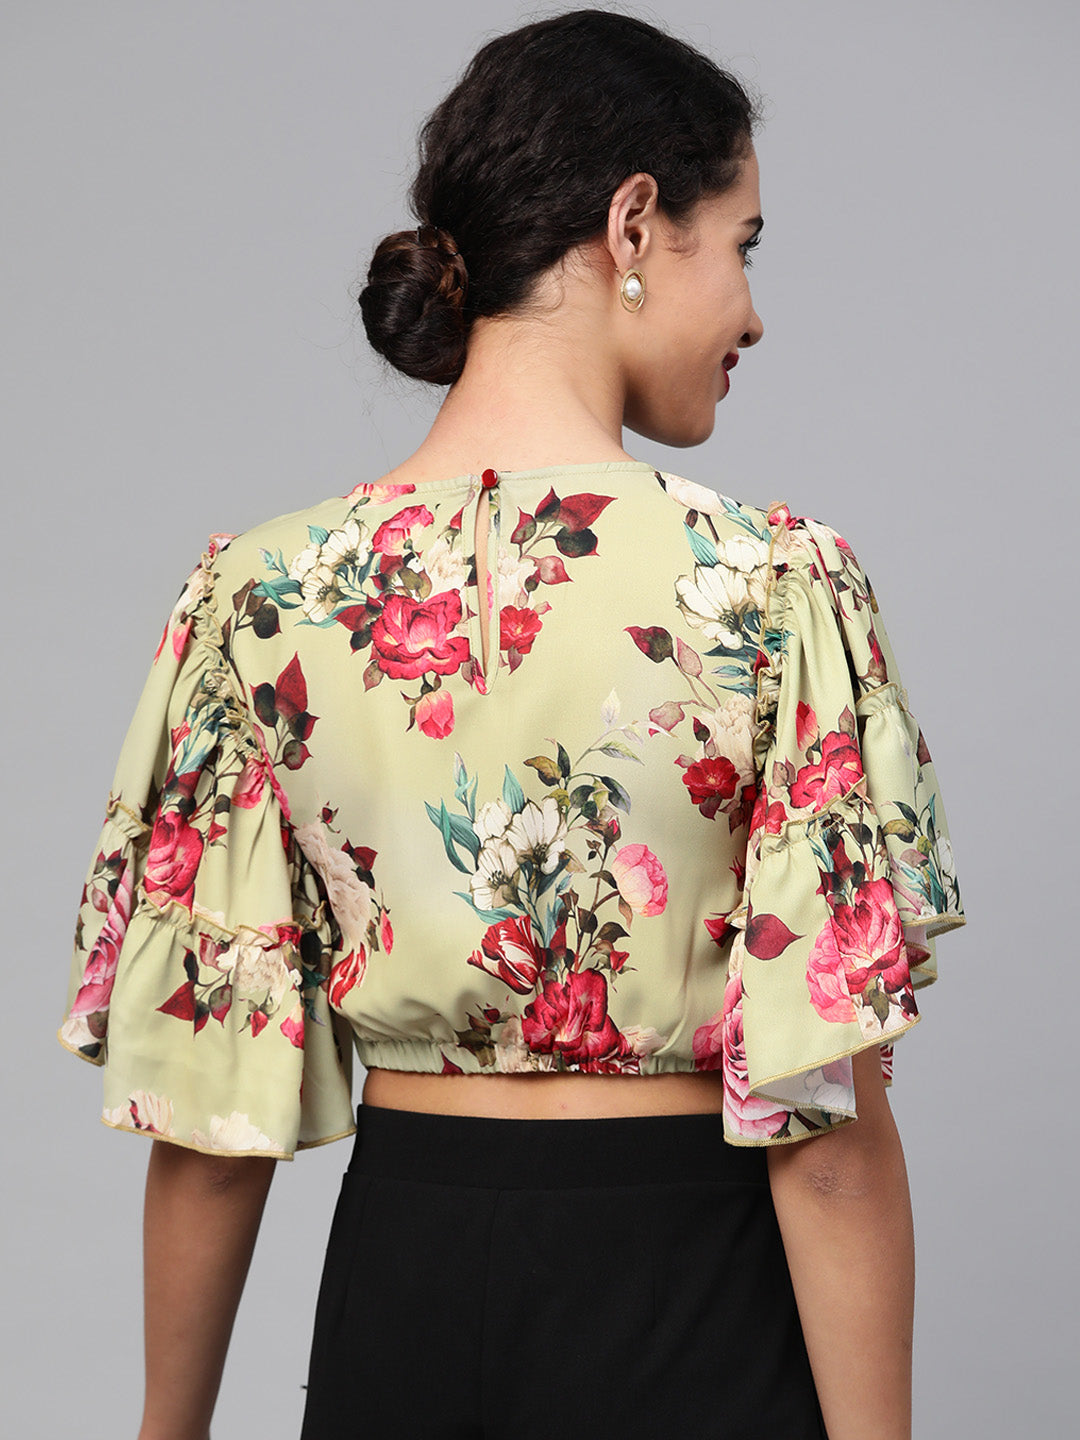 Green Floral Flare Sleeve Crop Top